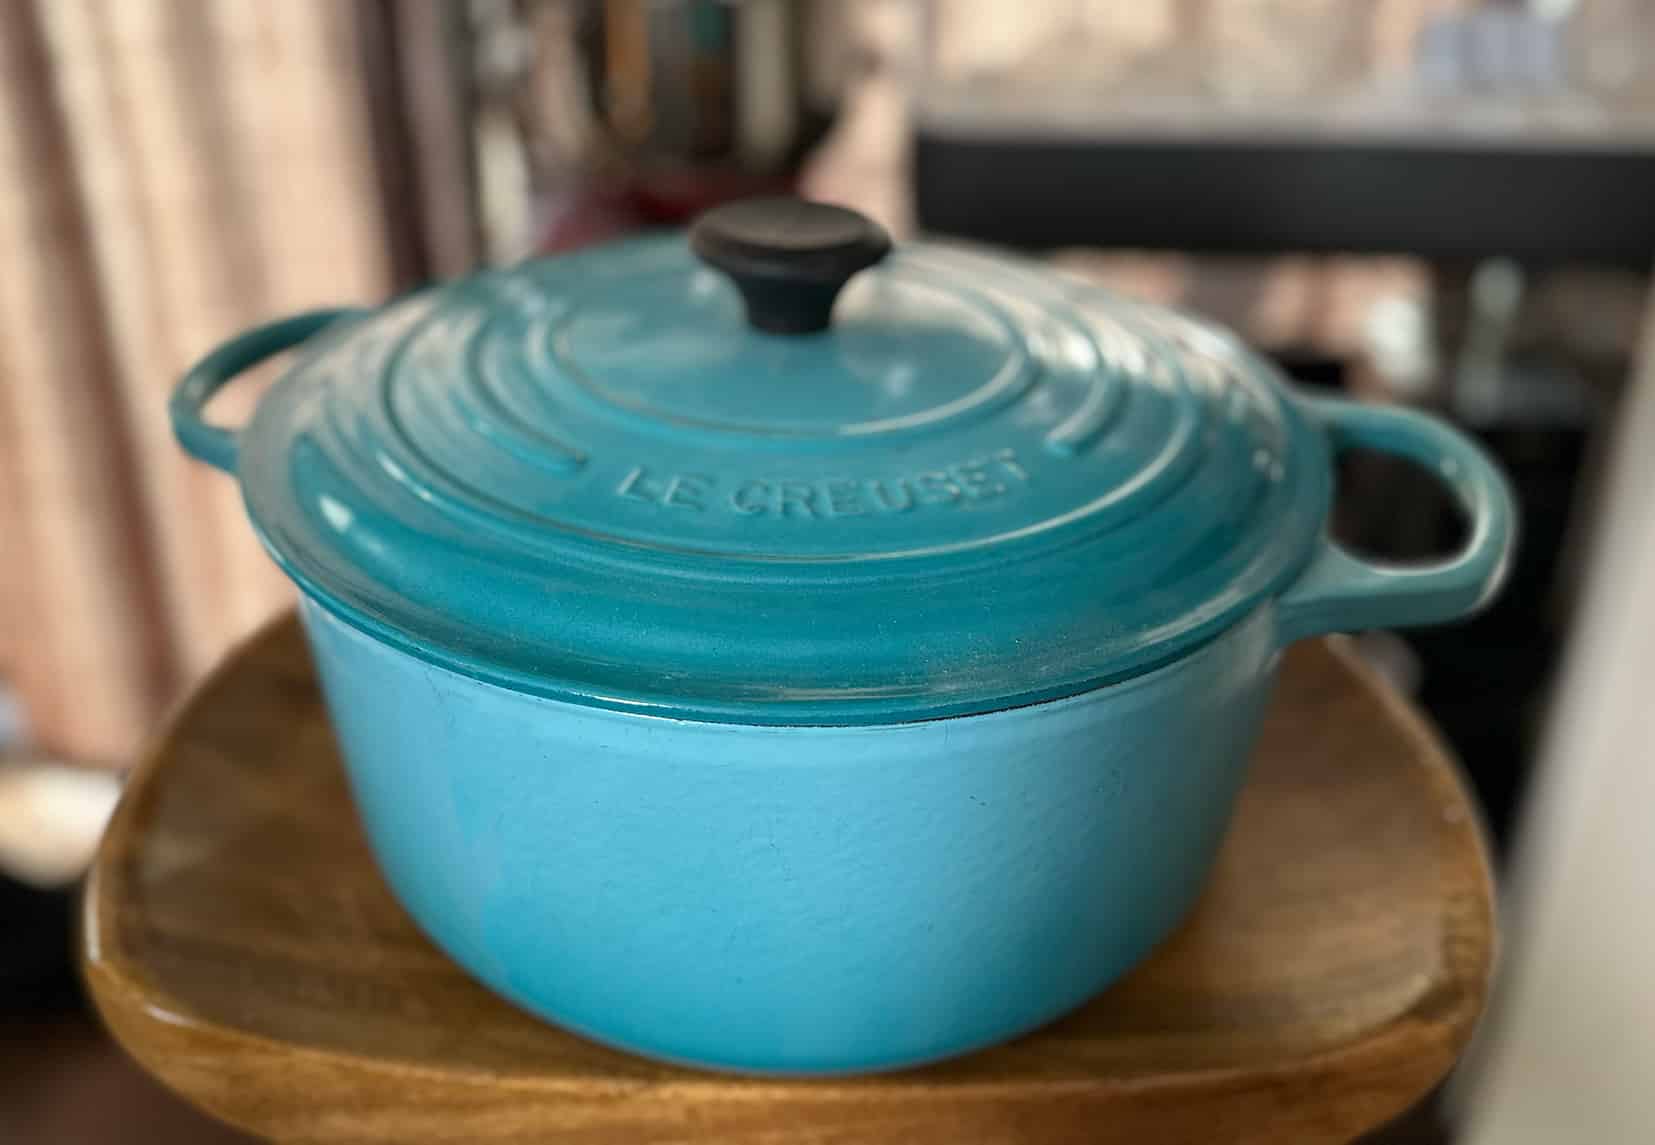 Why You Want an Enameled Cast Iron Dutch Oven in Your Kitchen